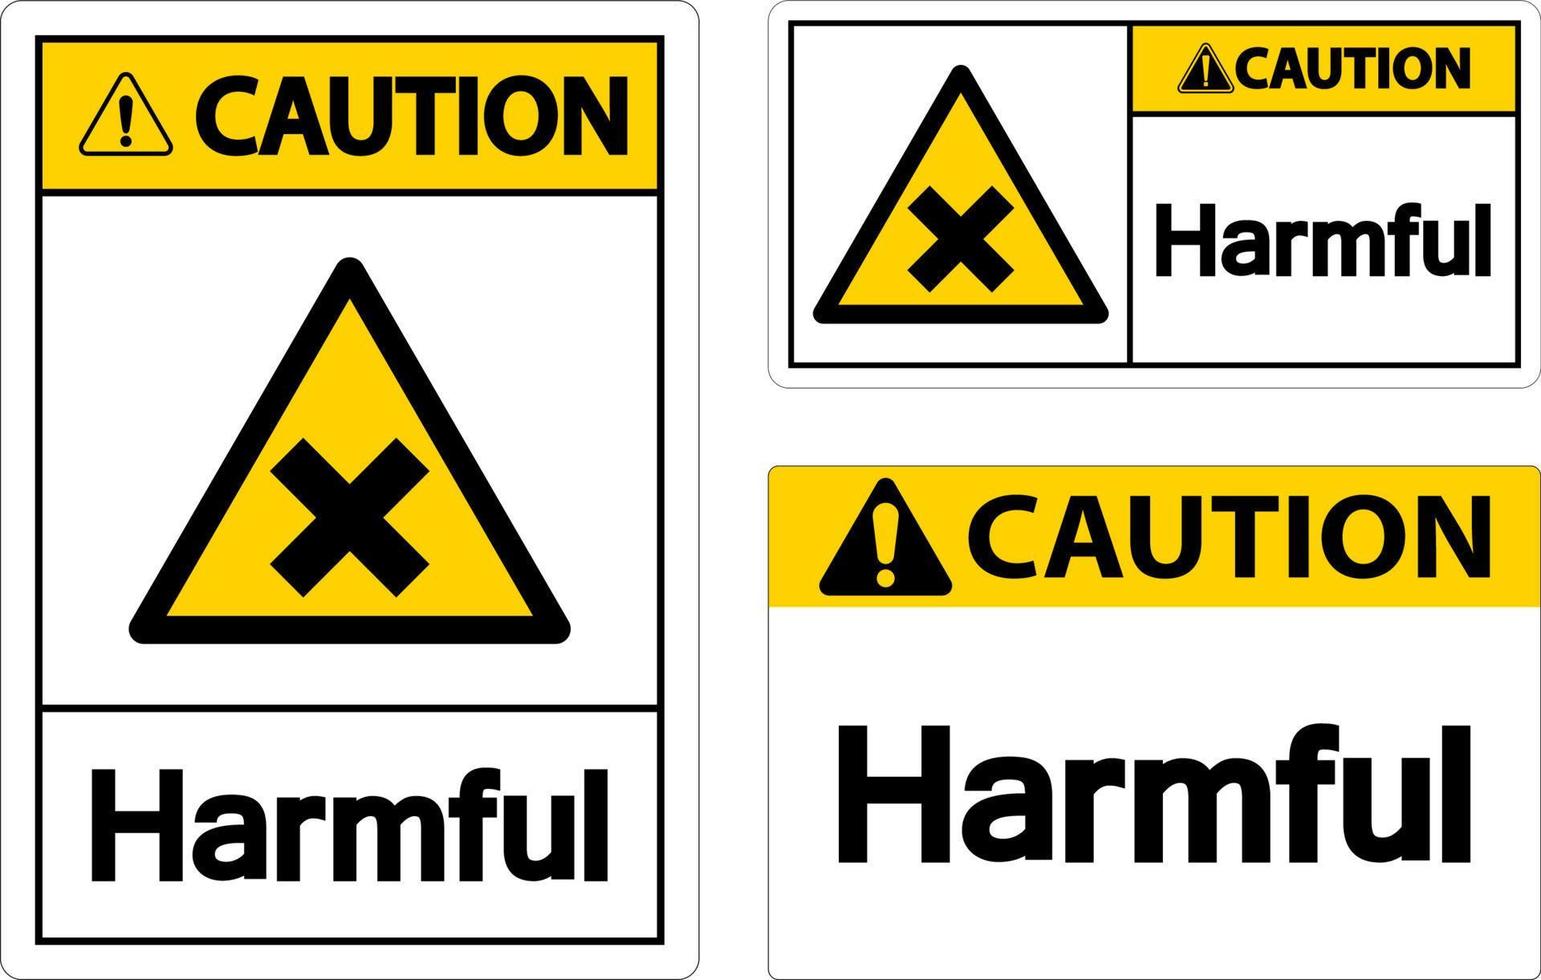 Harmful Caution Sign On White Background vector